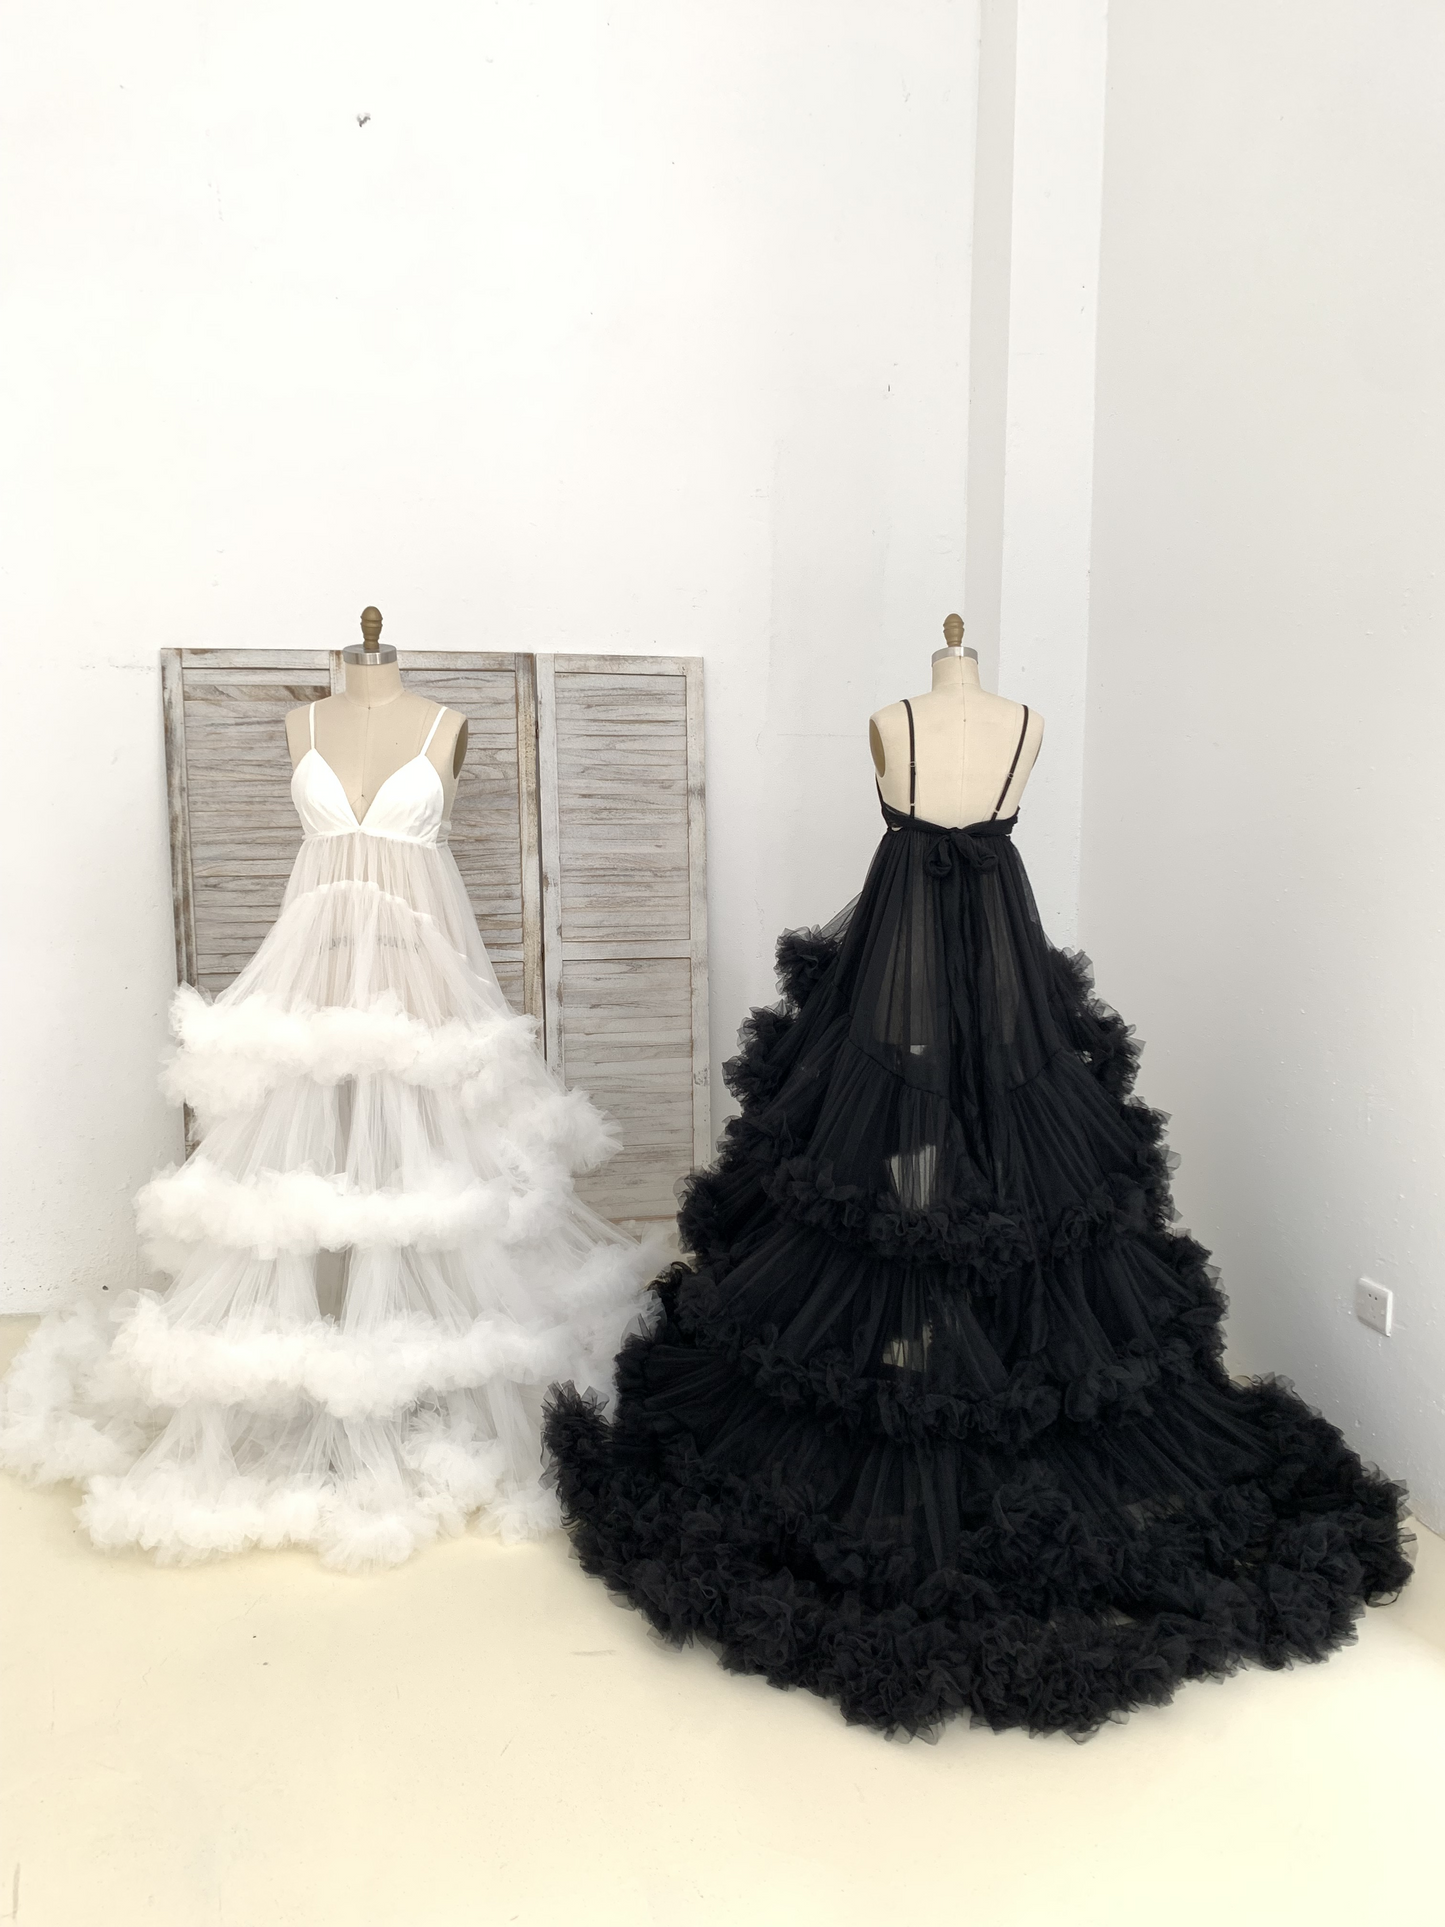 2 Pieces Tulle Maternity Dress for Photo Shoot Maternity Gown Baby Shower Dress